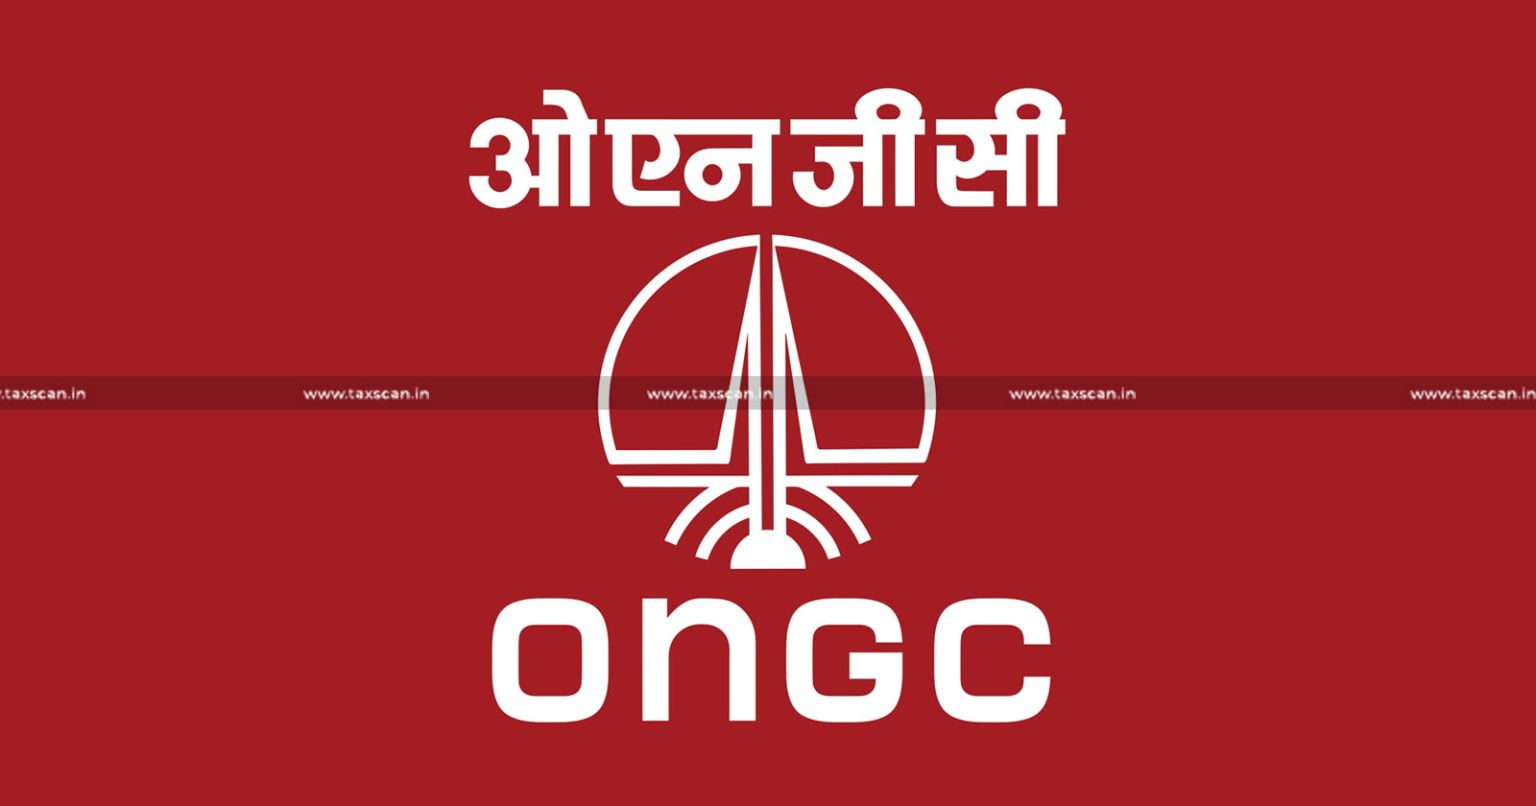 ONGC - Taxscan.in News - Customs Duty Remission - CESTAT - Goods lost in fire accident - Customs duty - taxscan